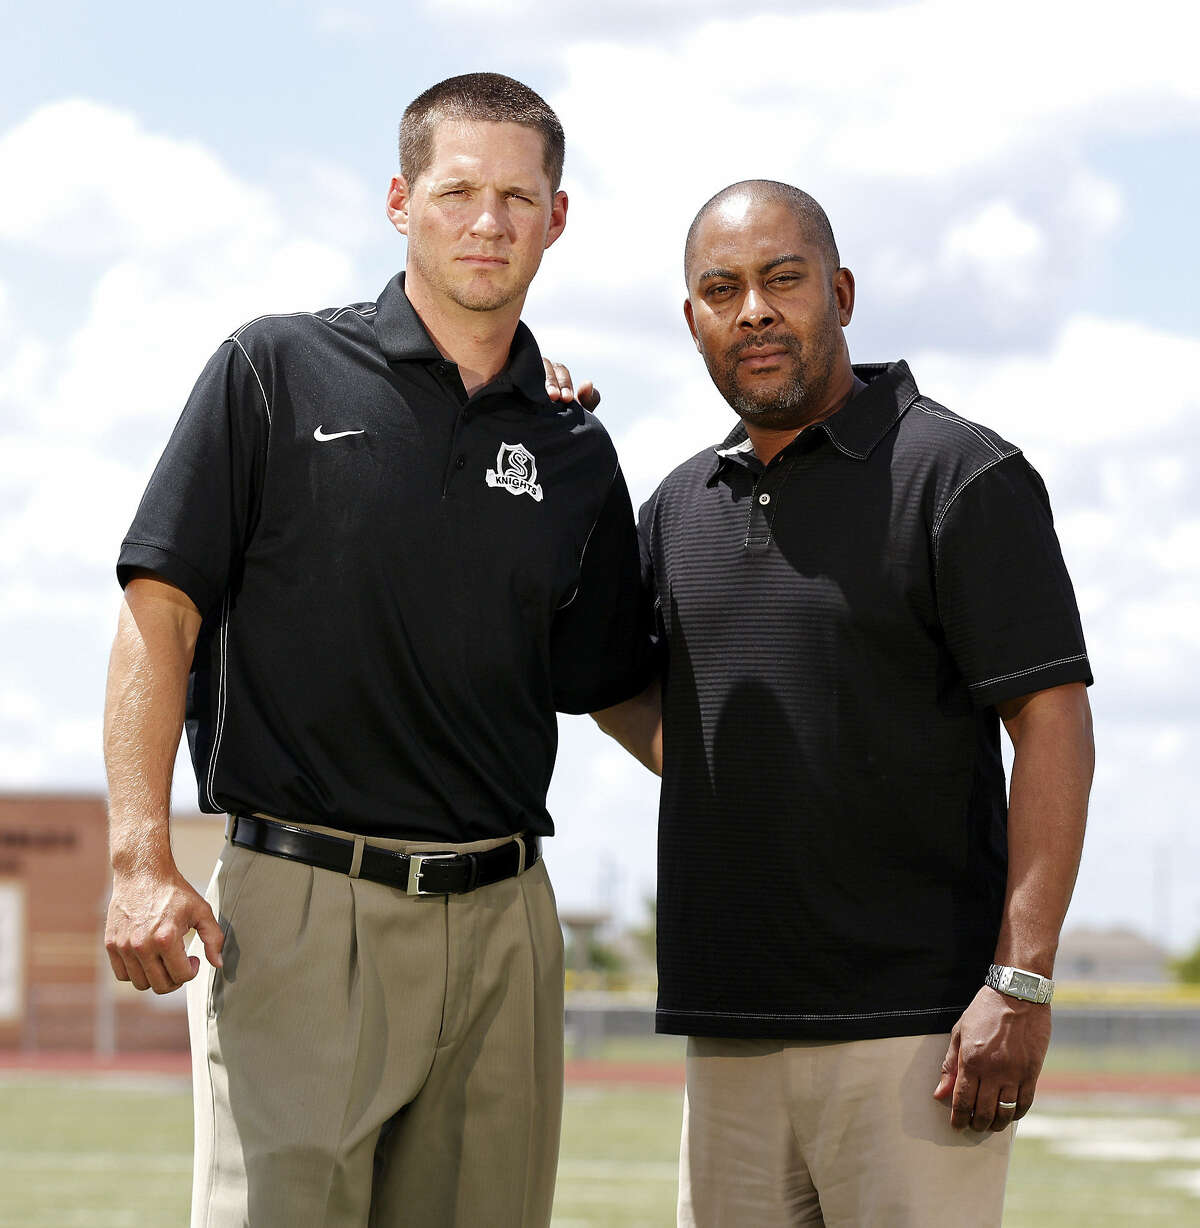 Mike Jinks, who will coach Tech's running backs, led Steele to the Class 5A Division II state title in 2010.